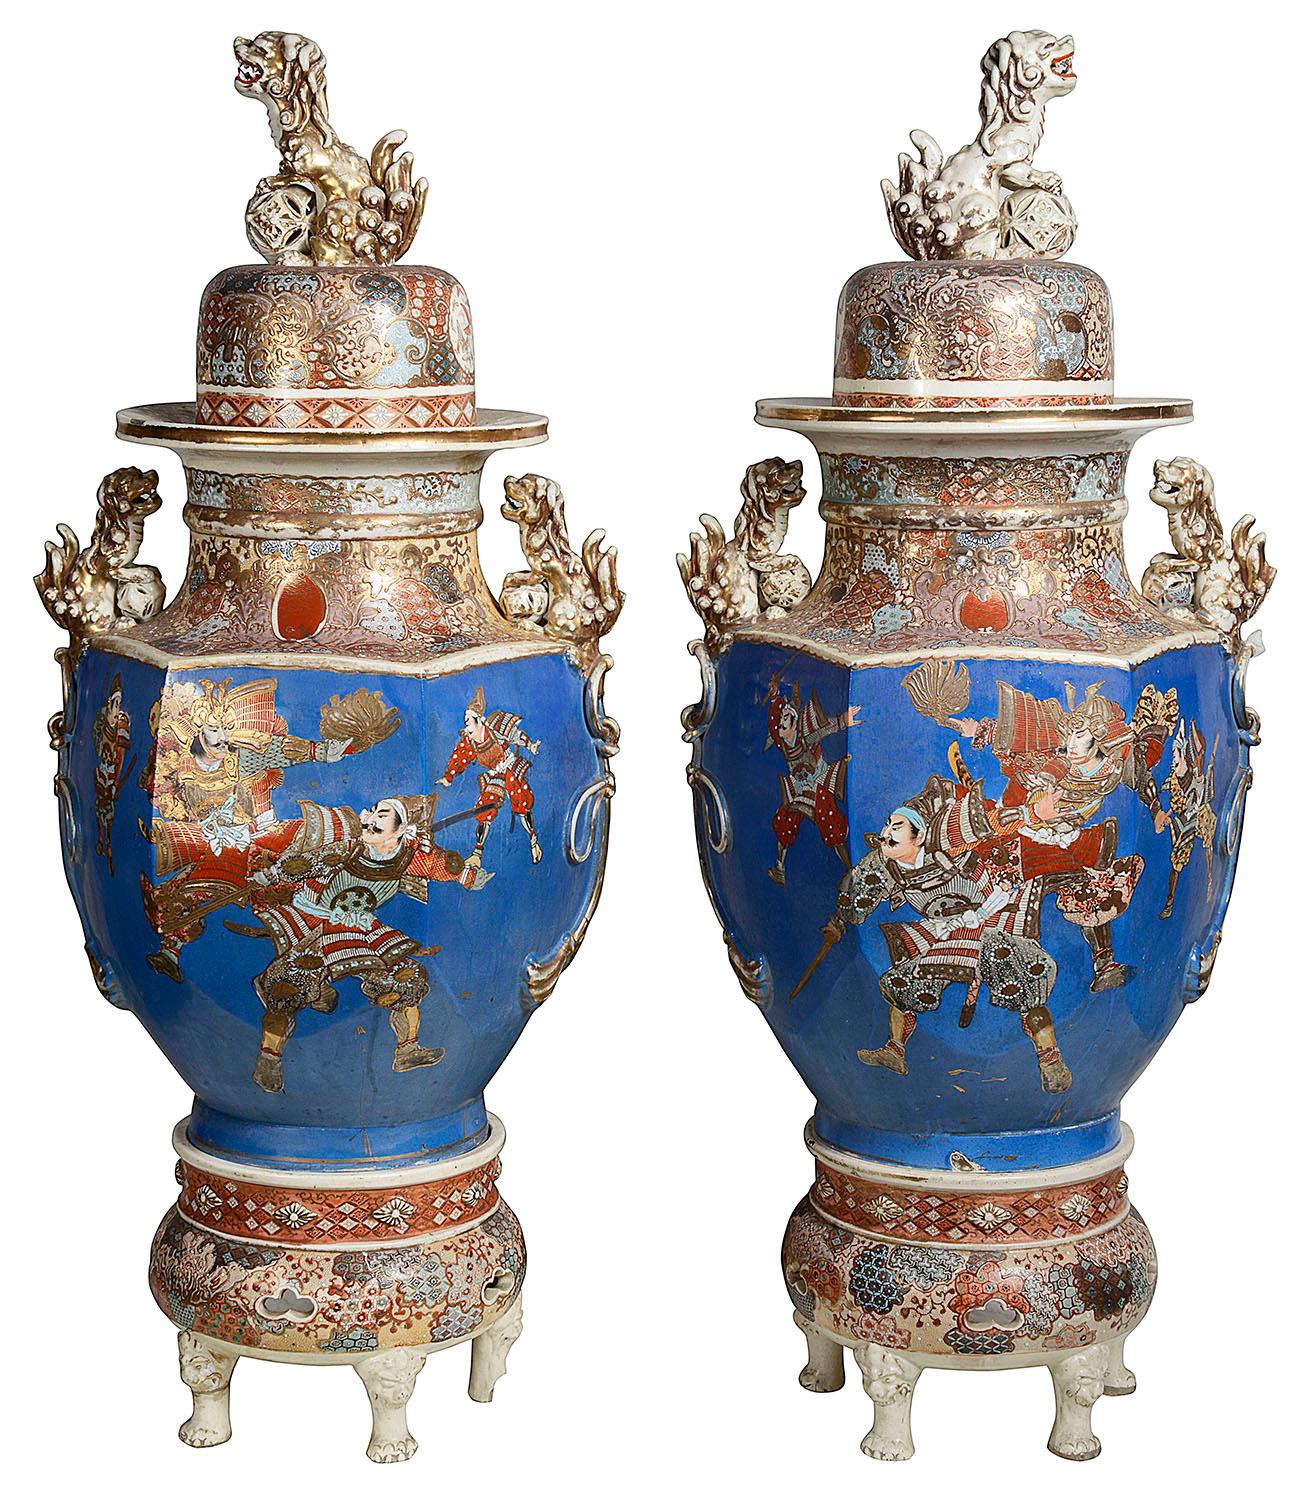 A very impressive pair of Japanese Meiji period (1868-1912) Satsuma lidded Koros (Vases) Each with a bold turquoise ground, classical gilded decoration, three Dog of Foo to the lids and handles, scenes of fighting Samurai warriors.